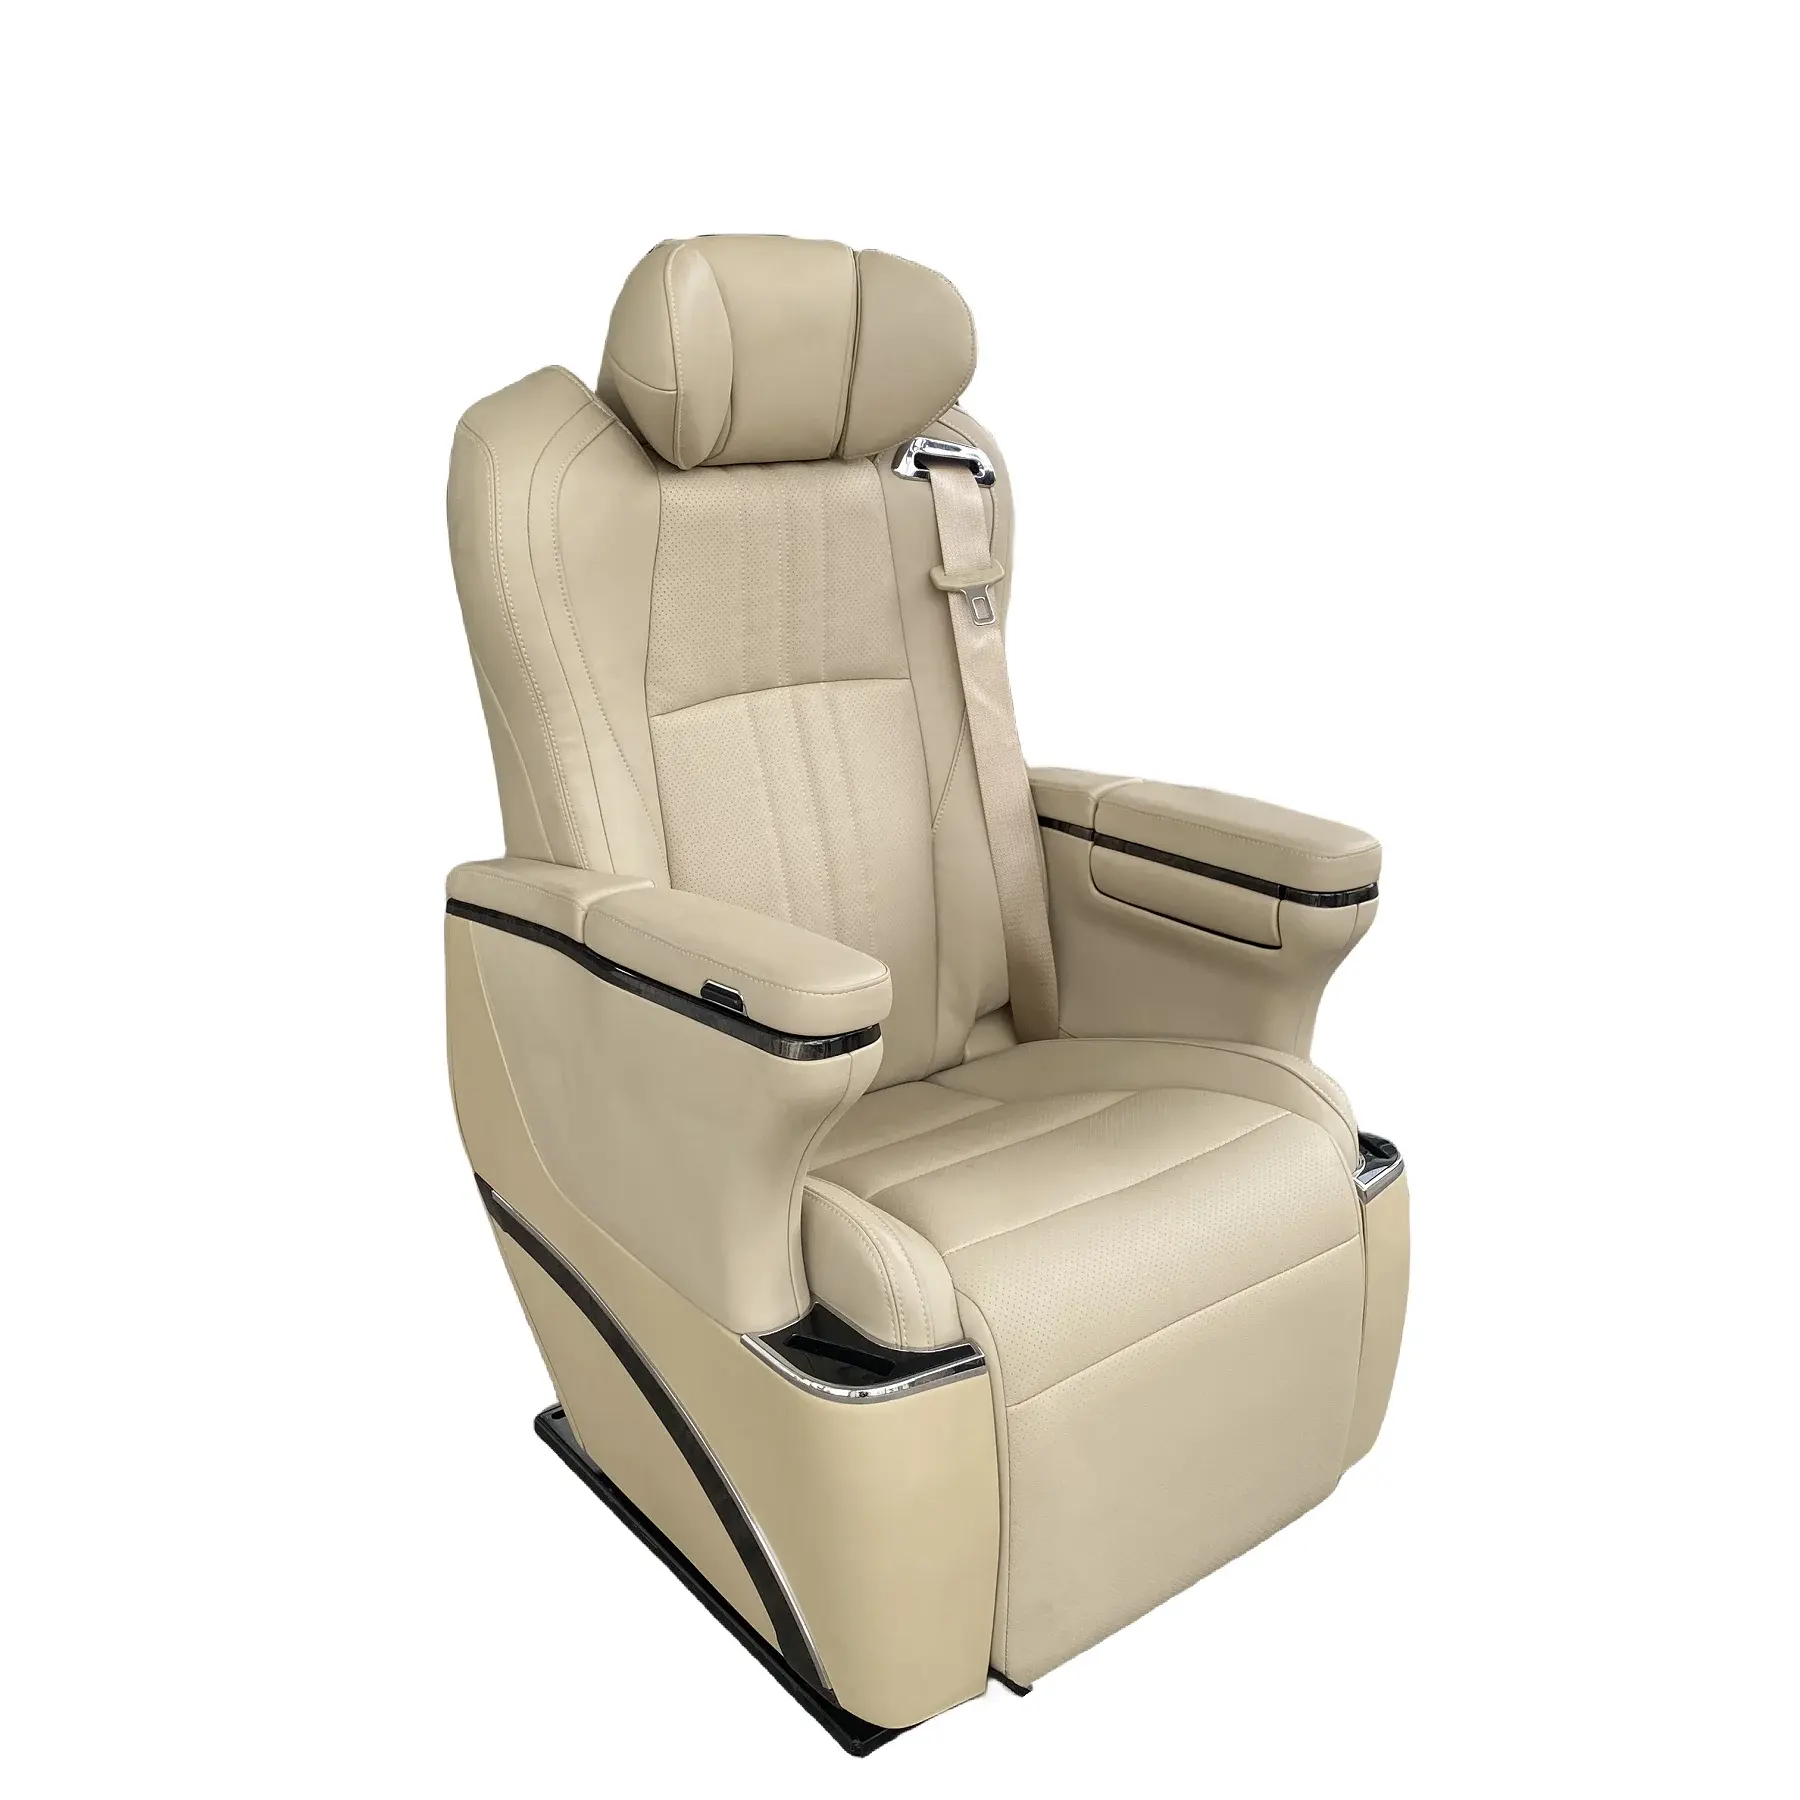 SE-EQA Car VIP MPV special airline special seat Car aviation Car aviation seat